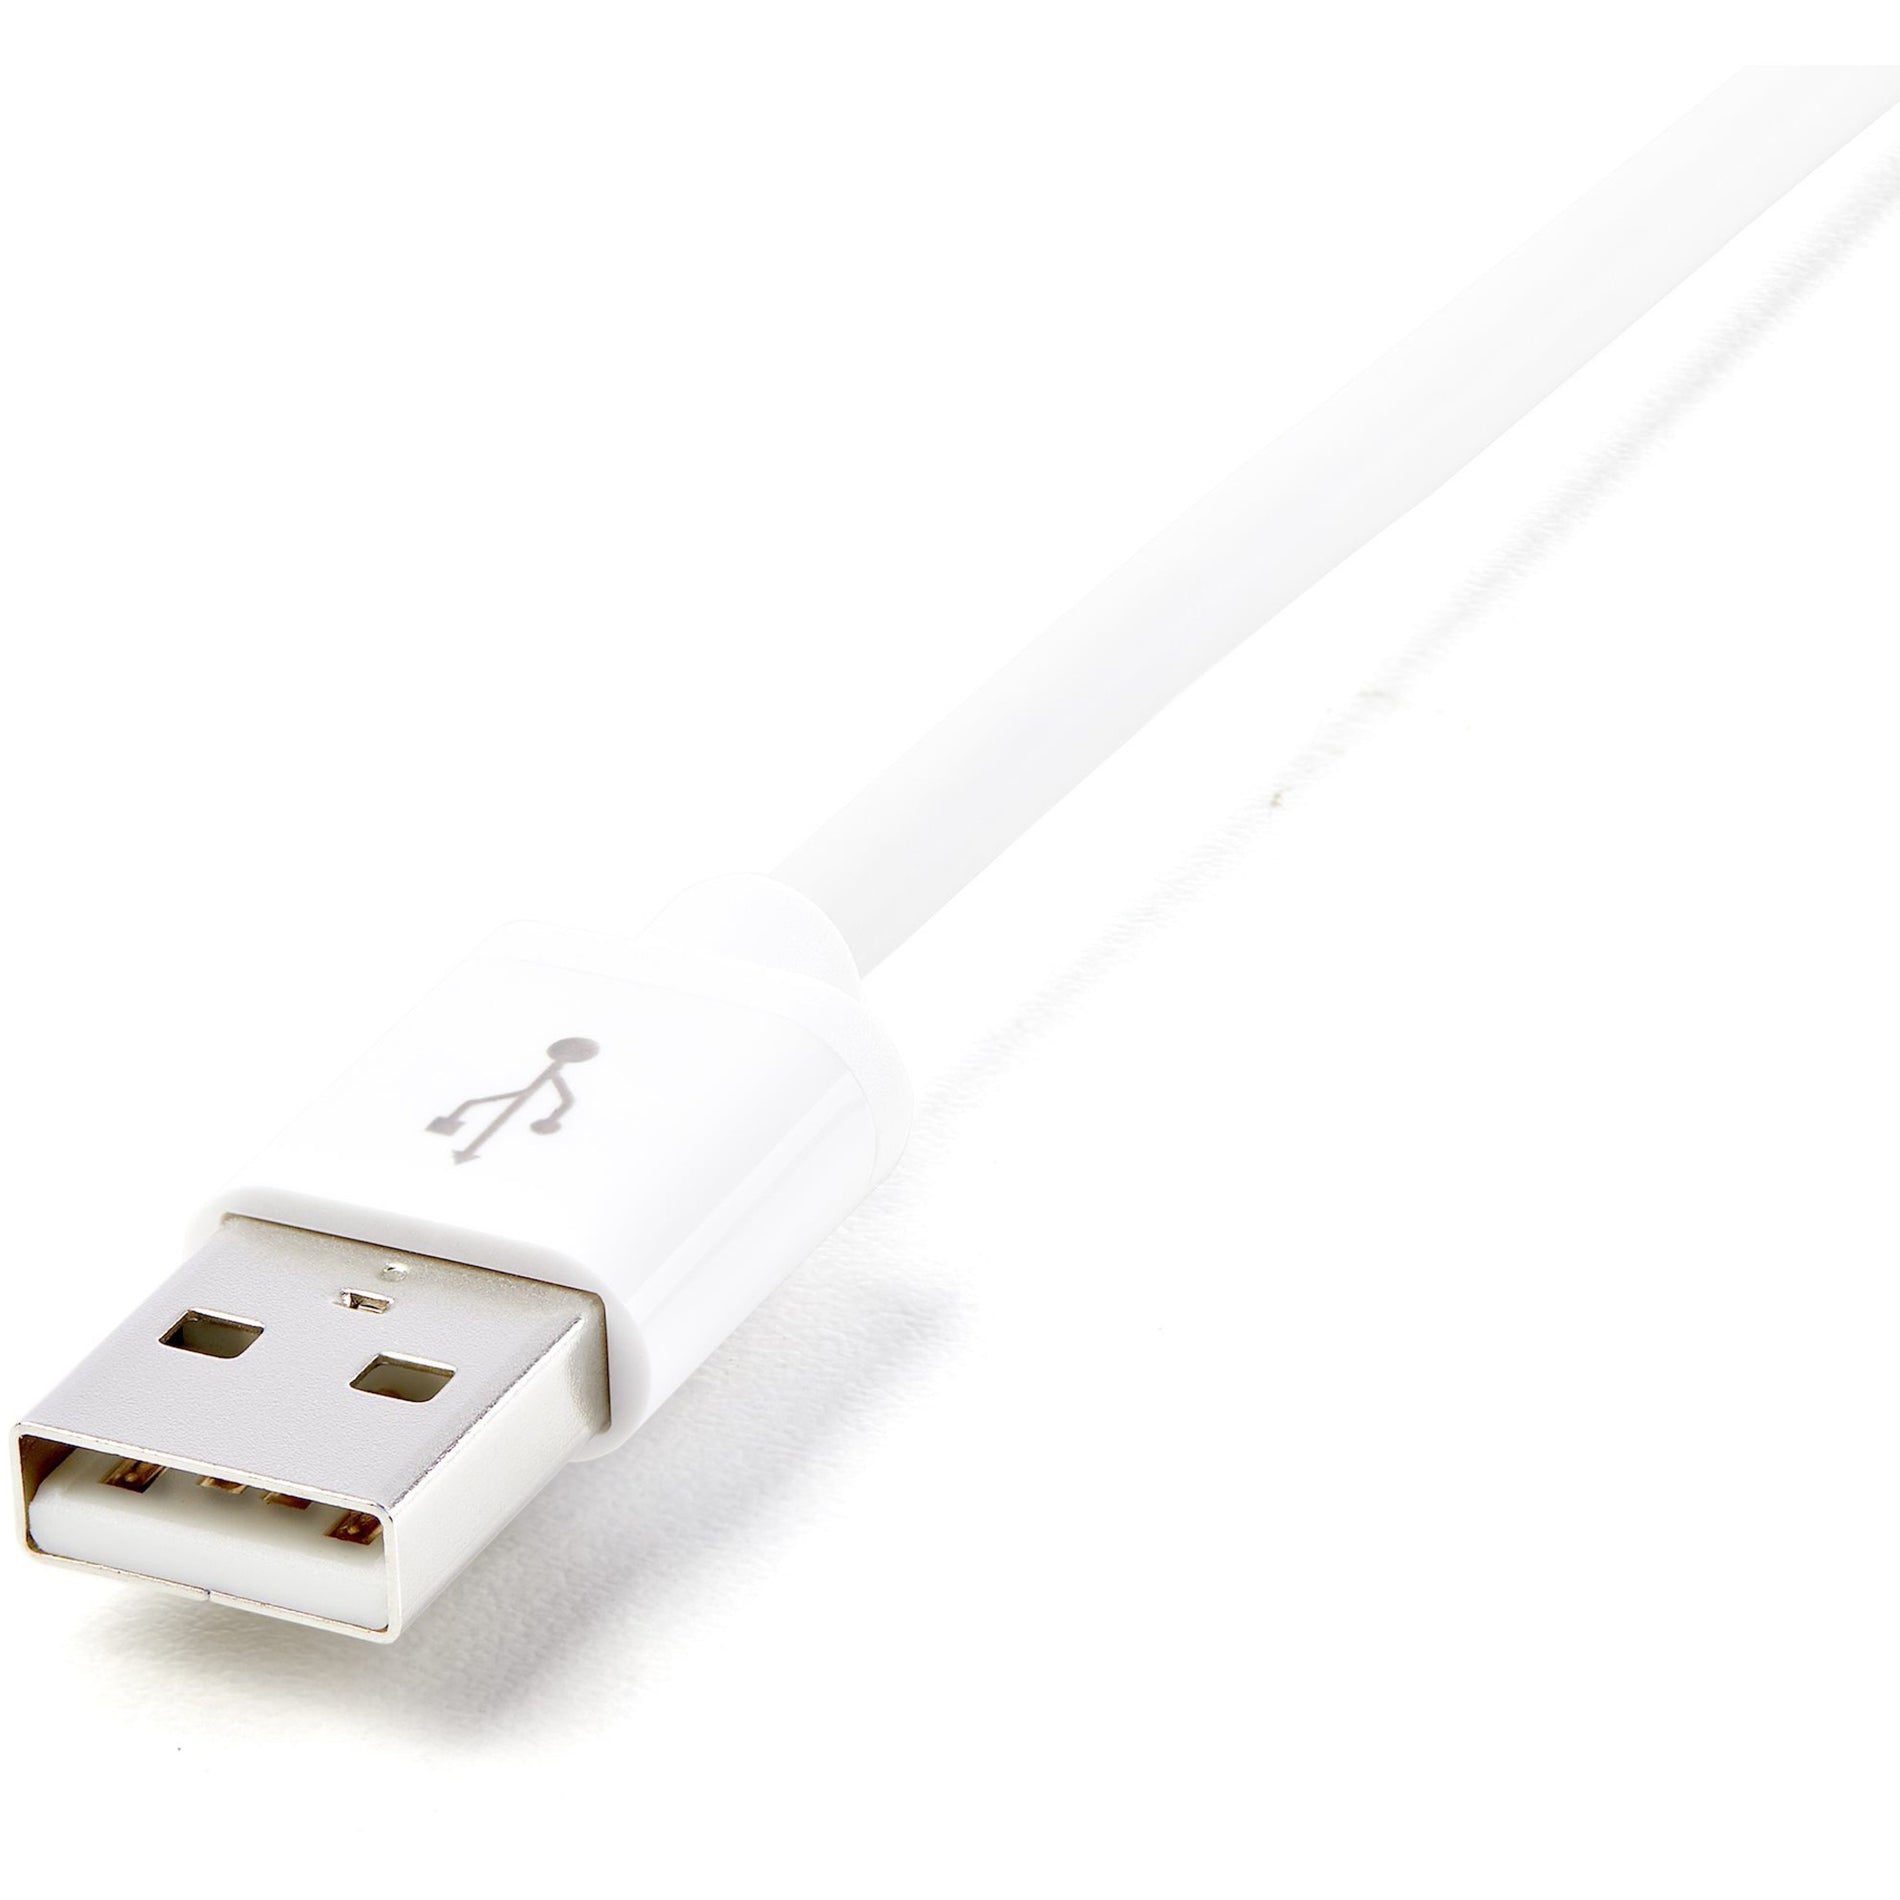 StarTech.com USBLT2MW Sync/Charge Lightning/USB Data Transfer Cable, 6ft Long White Apple-Compatible Cable